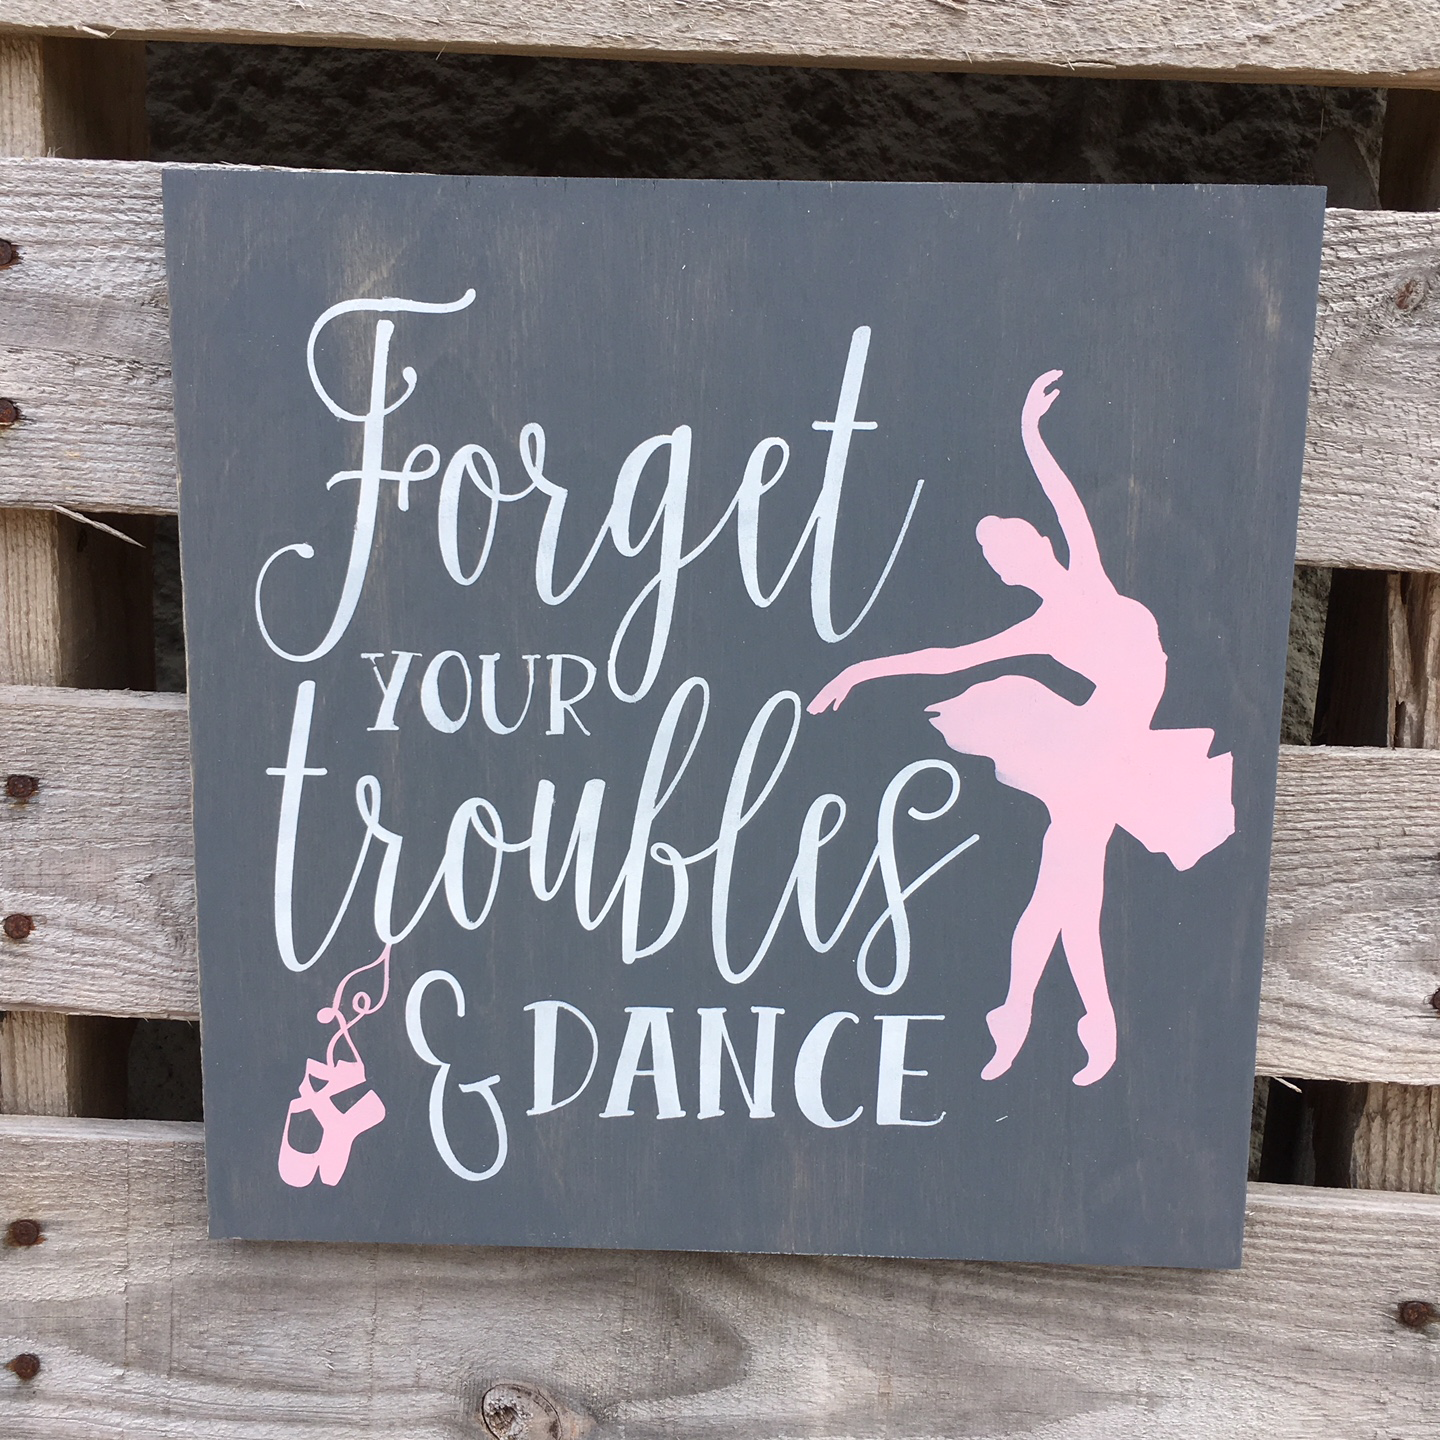 Forget your troubles & dance